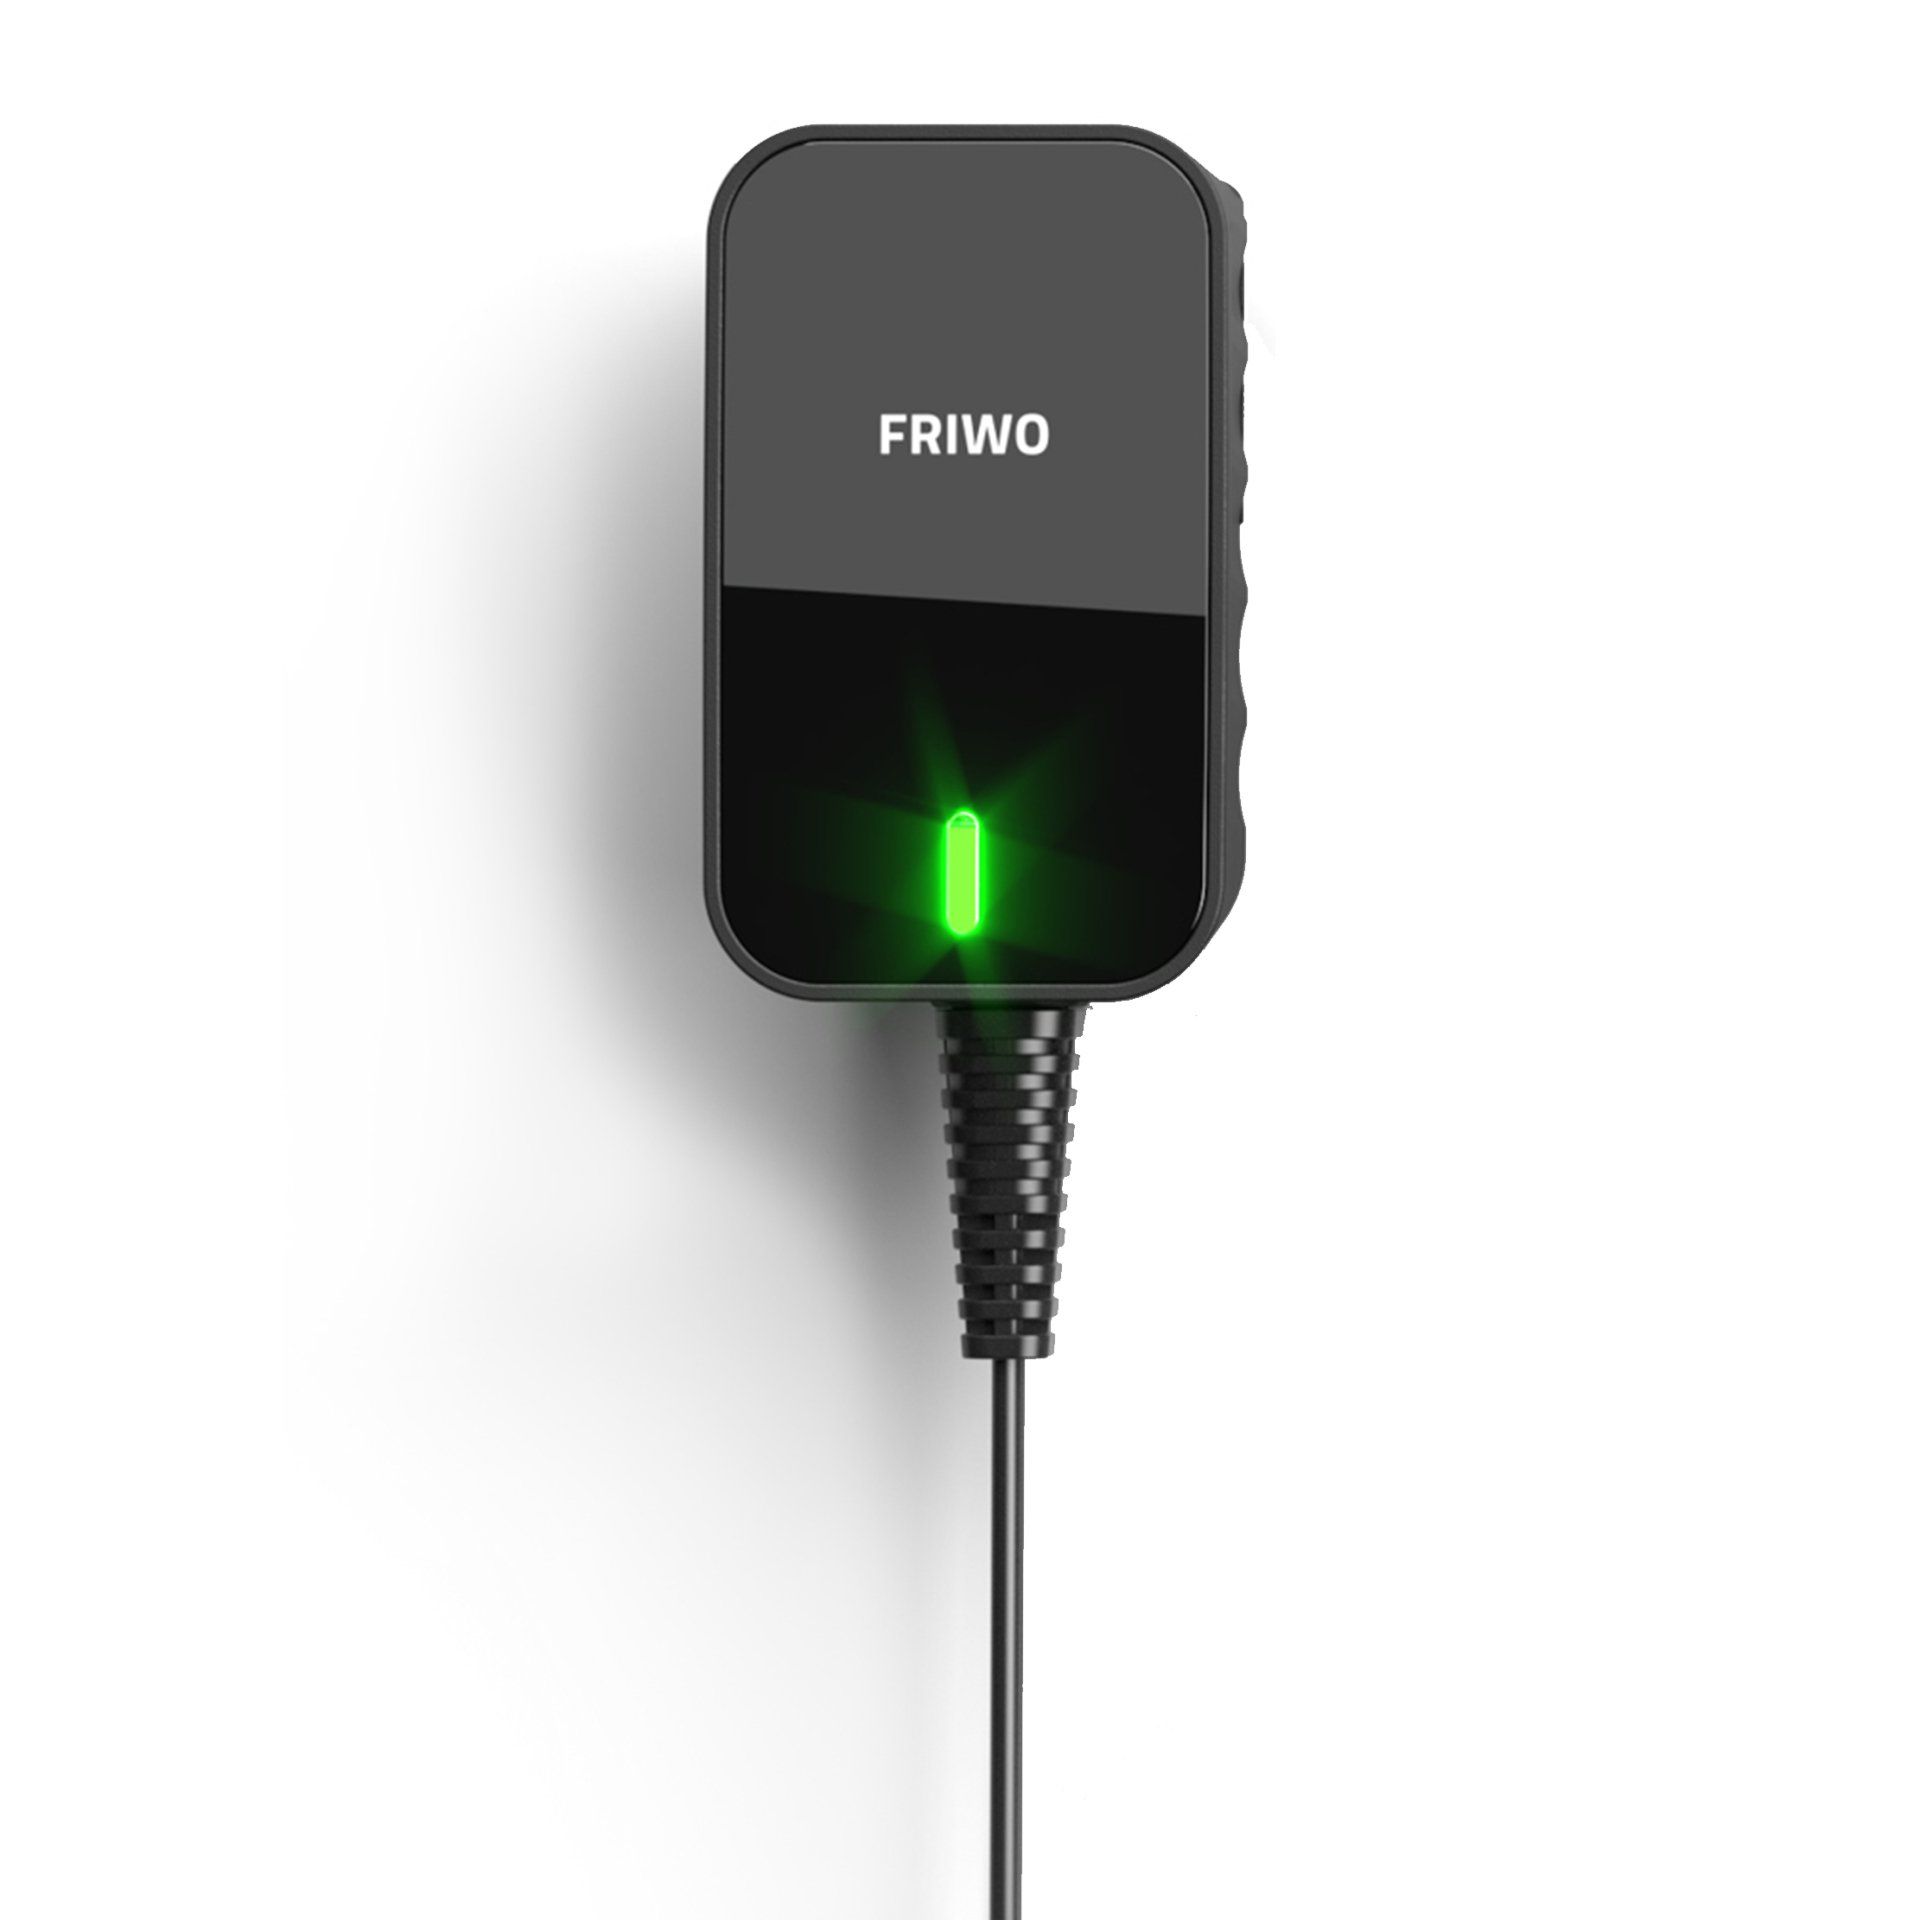 A friwo power supply with a green light on it is plugged into a wall.